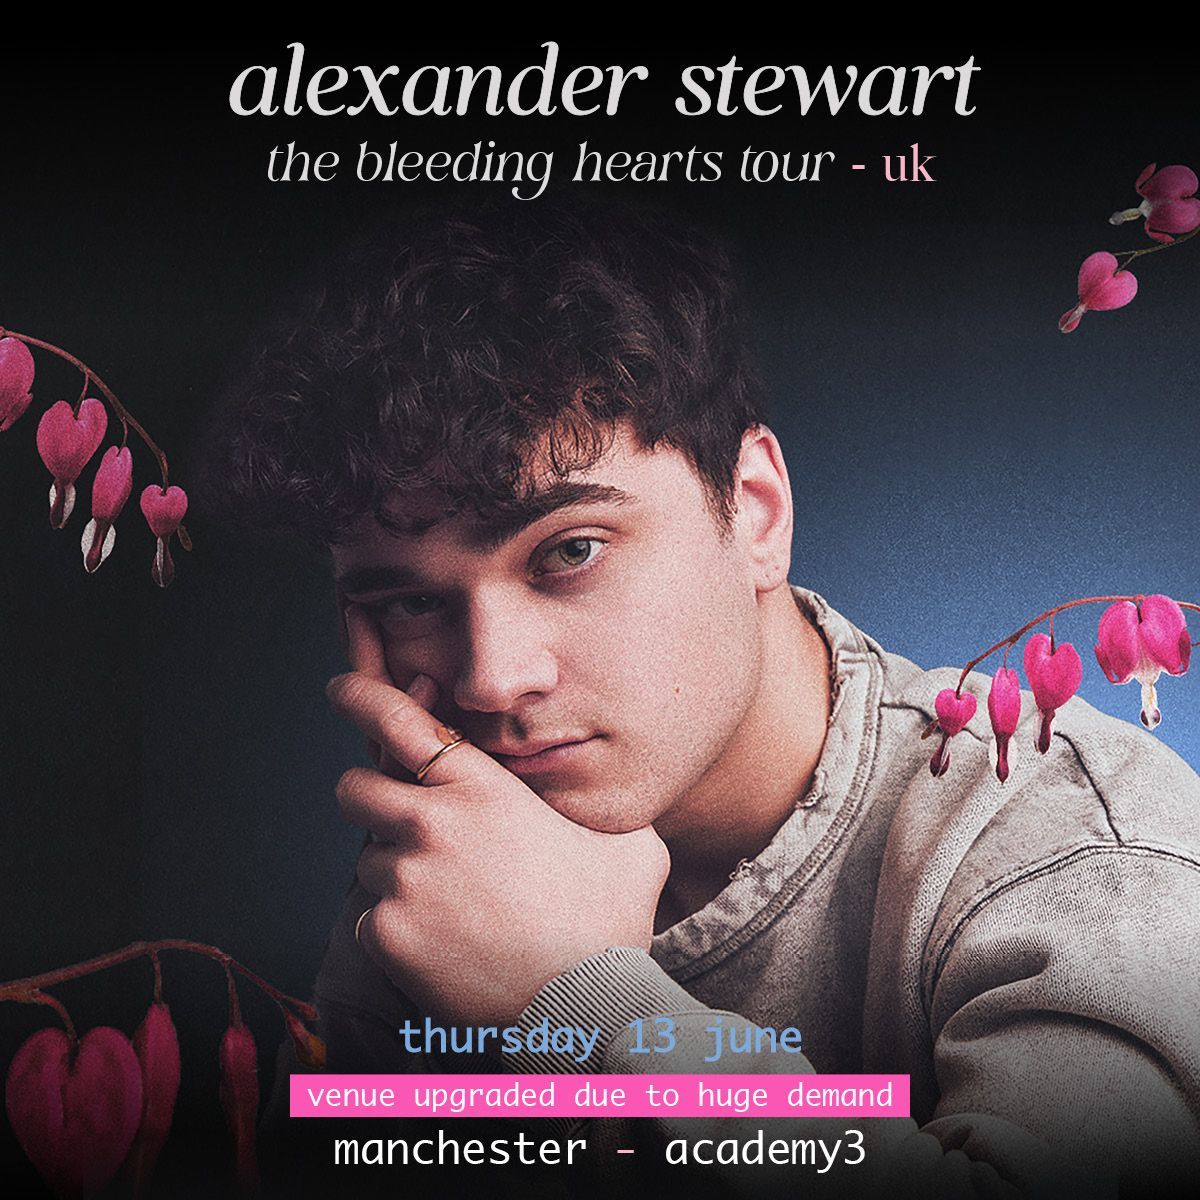 ⬆️ VENUE UPGRADE: We're buzzing to announce that due to huge demand @_alexanderstew will now play Manchester Academy 3 on Thursday 13th June 2024 Original tickets from our friends at @yes_mcr remain valid! 🎫 TICKETS via buff.ly/3wvcN6O